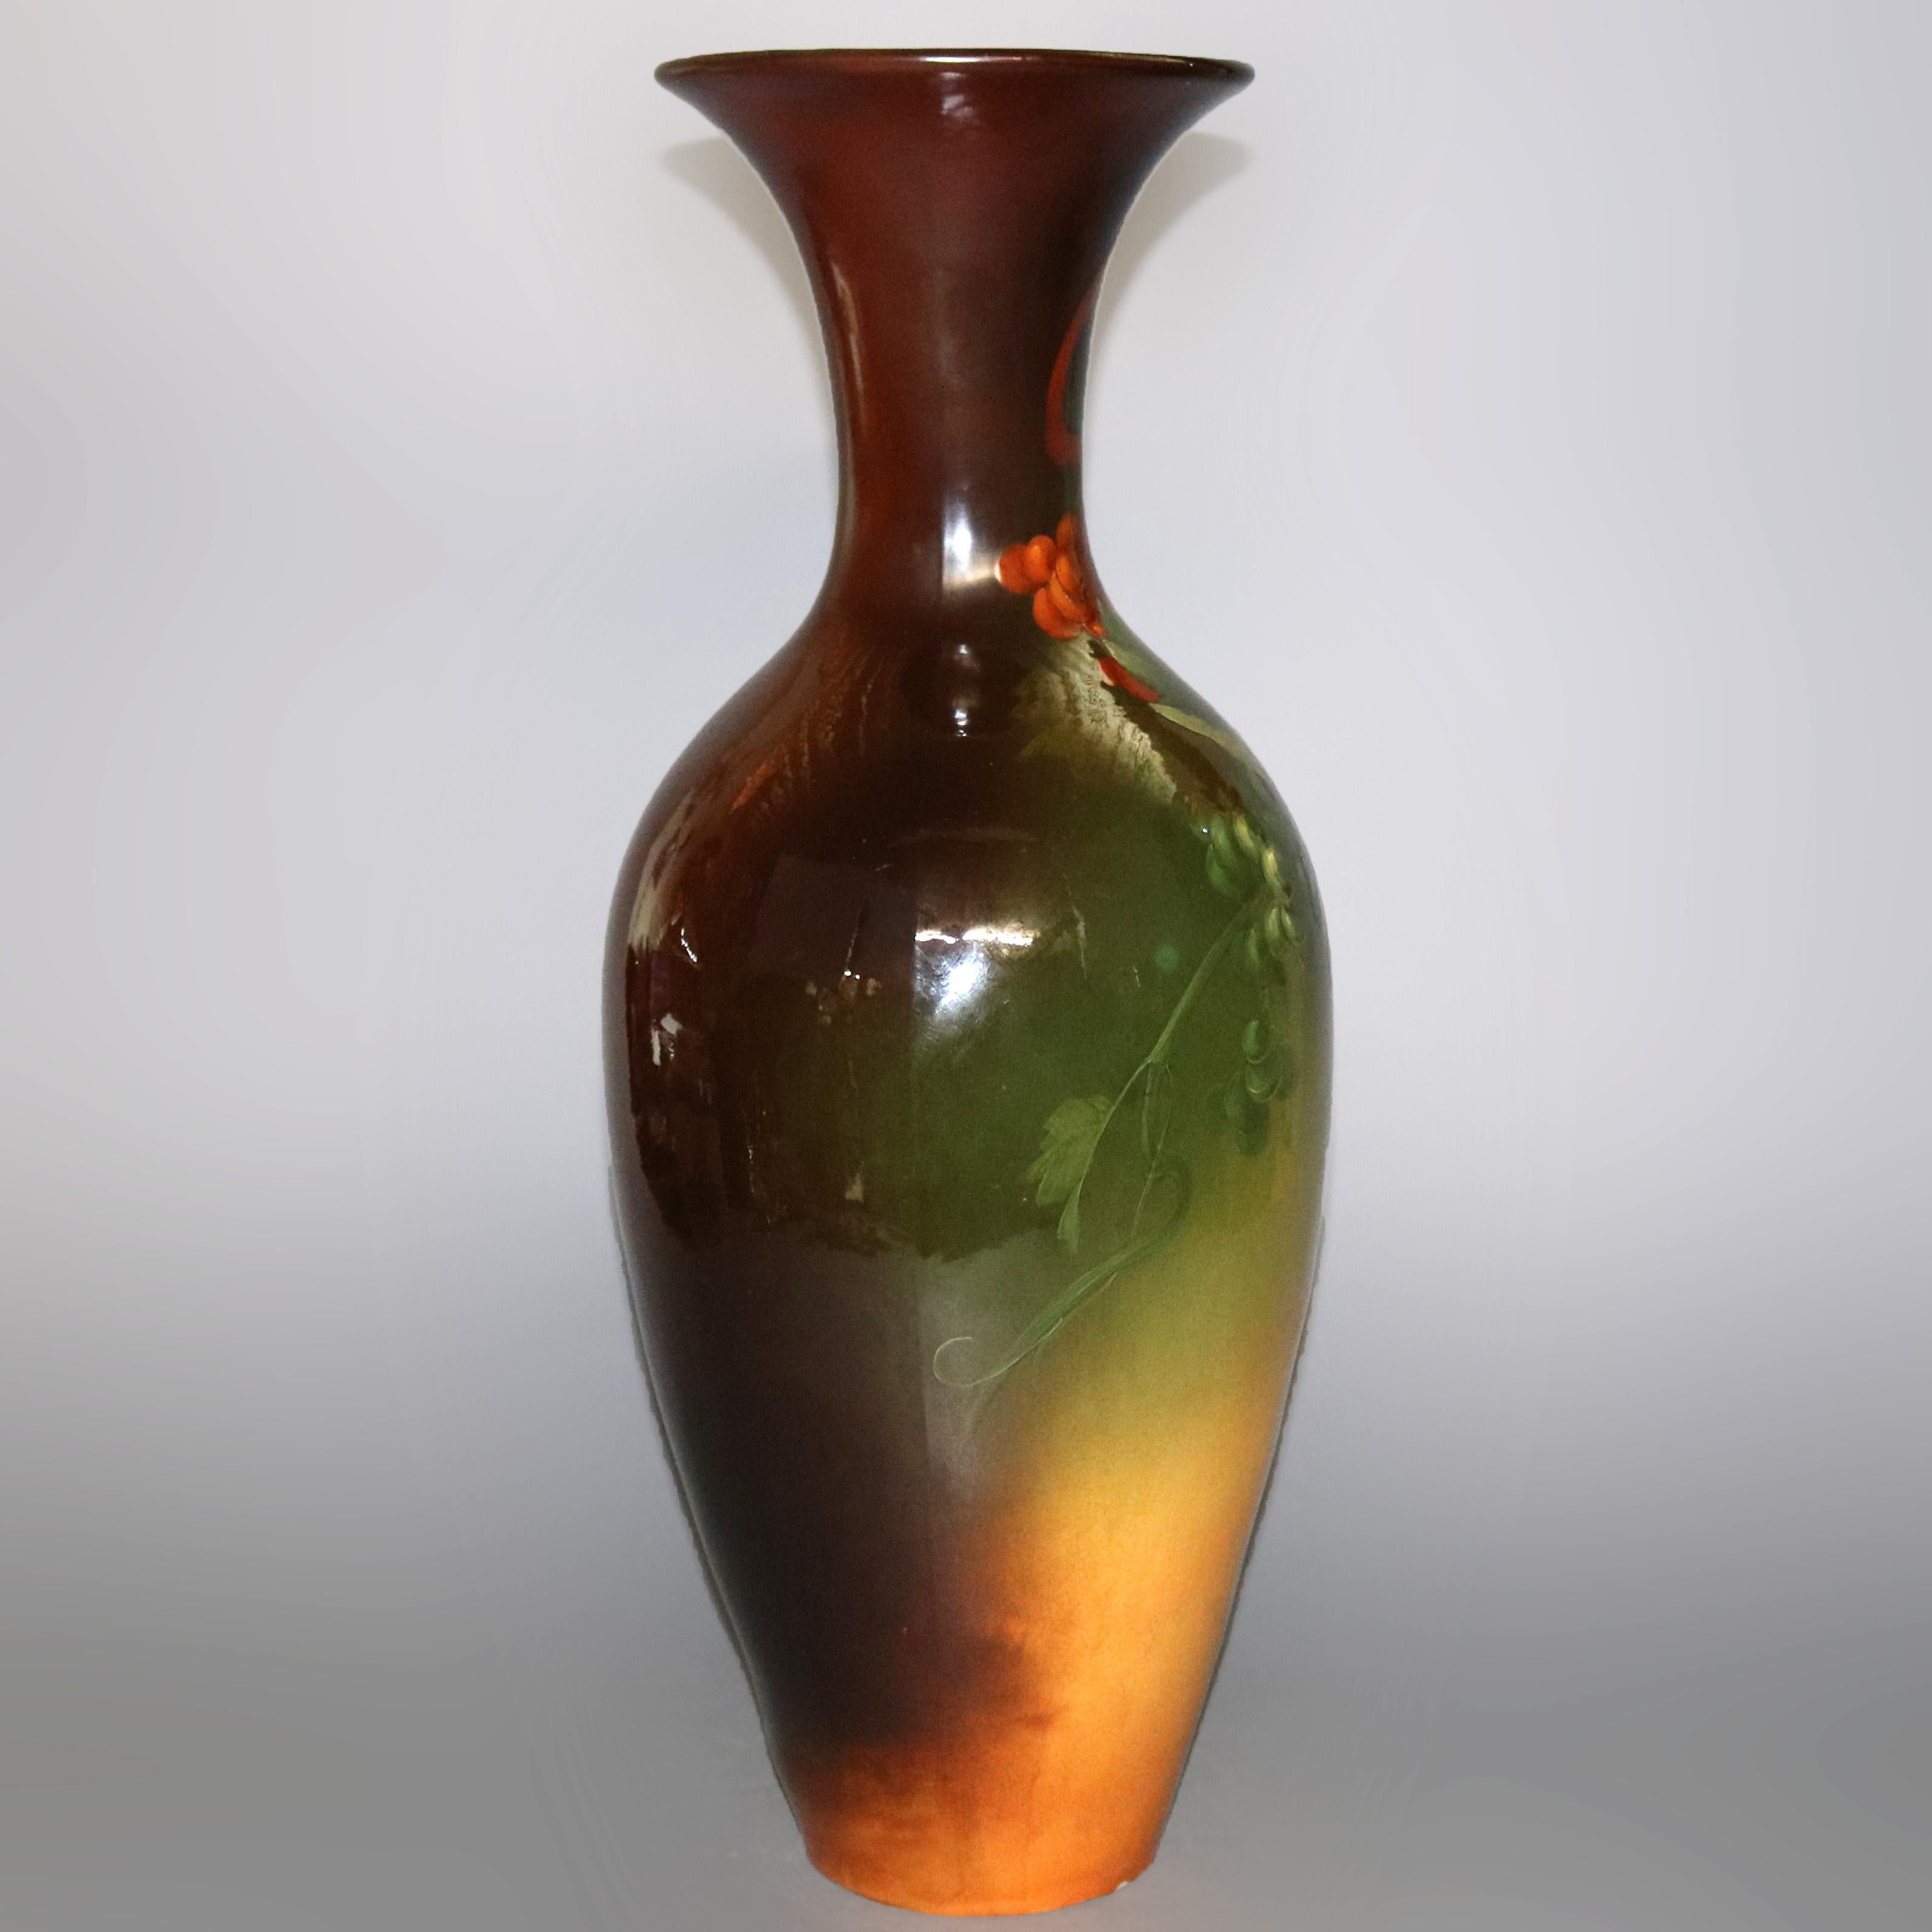 Large antique Arts & Crafts art pottery floor vase by Louwelsa Weller offers grape and vine decoration with standard glaze, maker mark stamped in base as photographed, circa 1910

Measures: 25